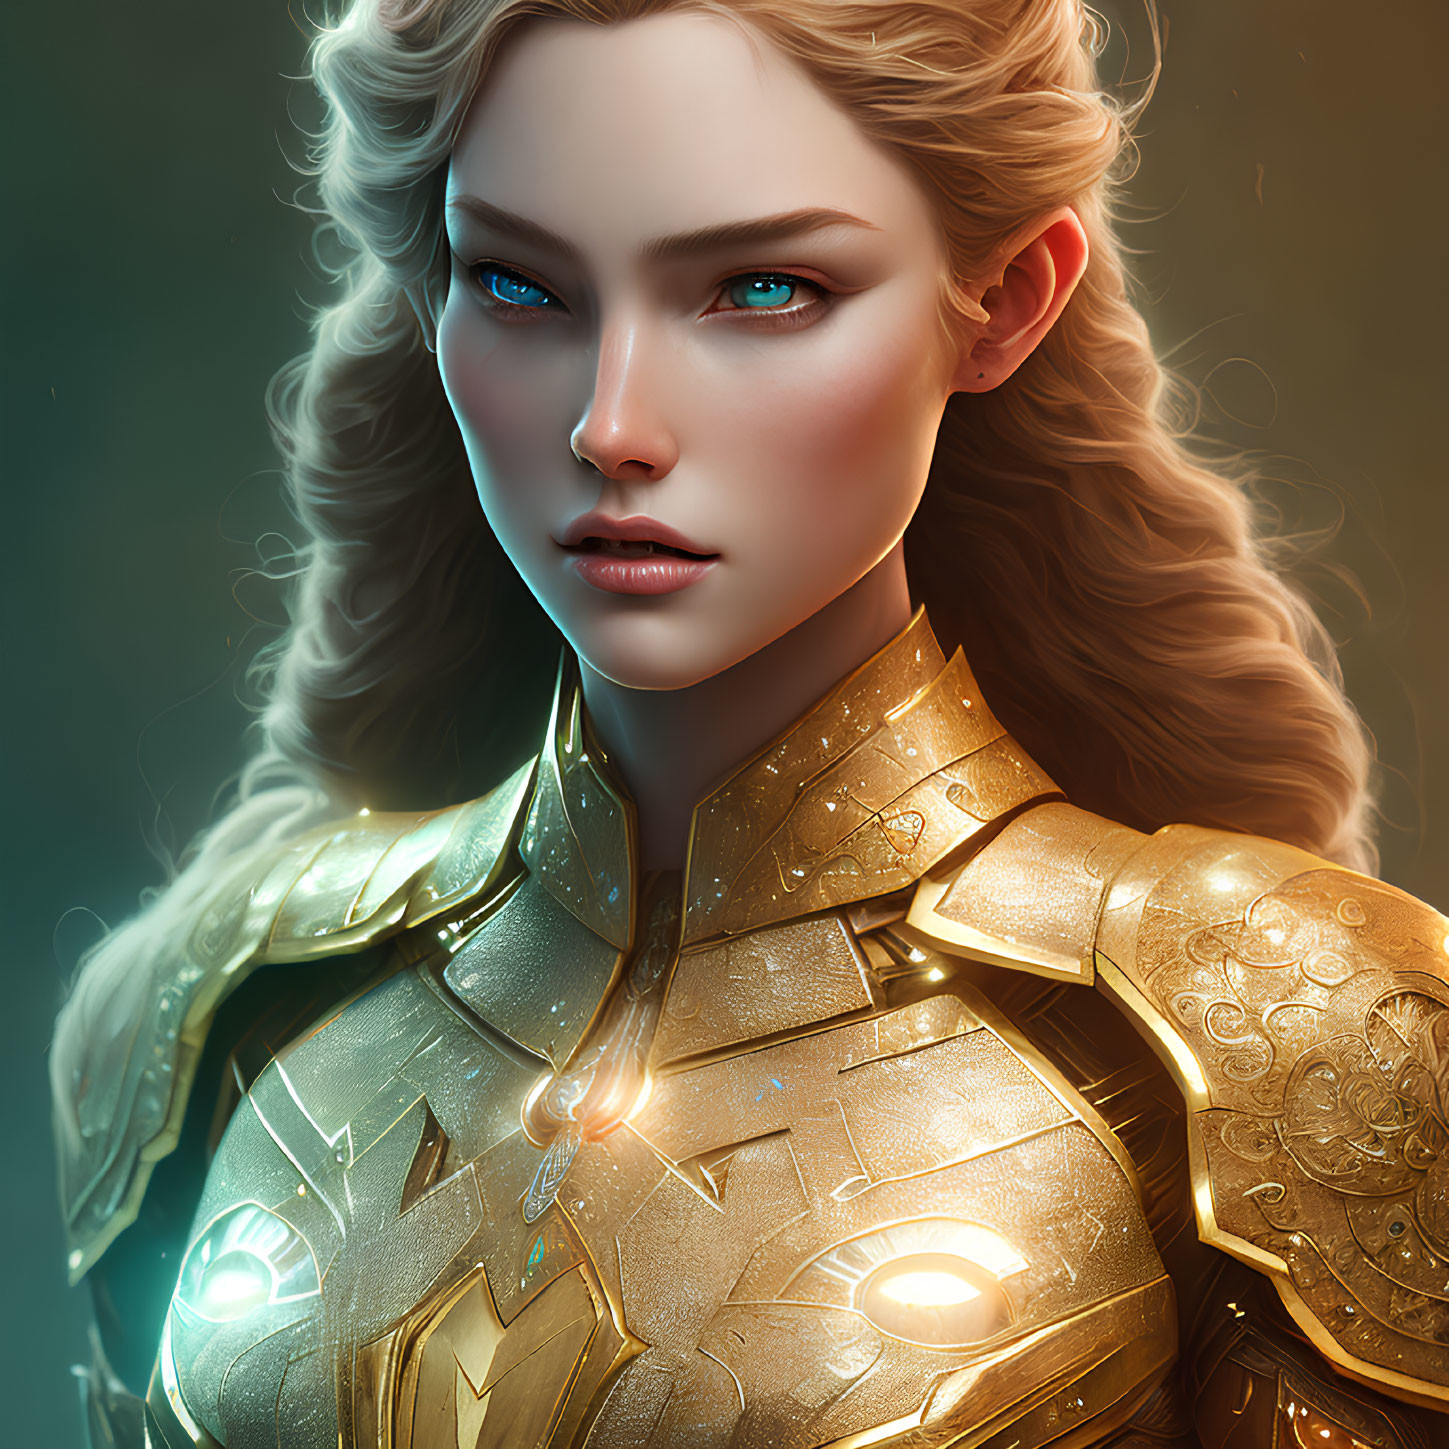 Digital artwork: Woman in golden armor with blue eyes and blonde hair